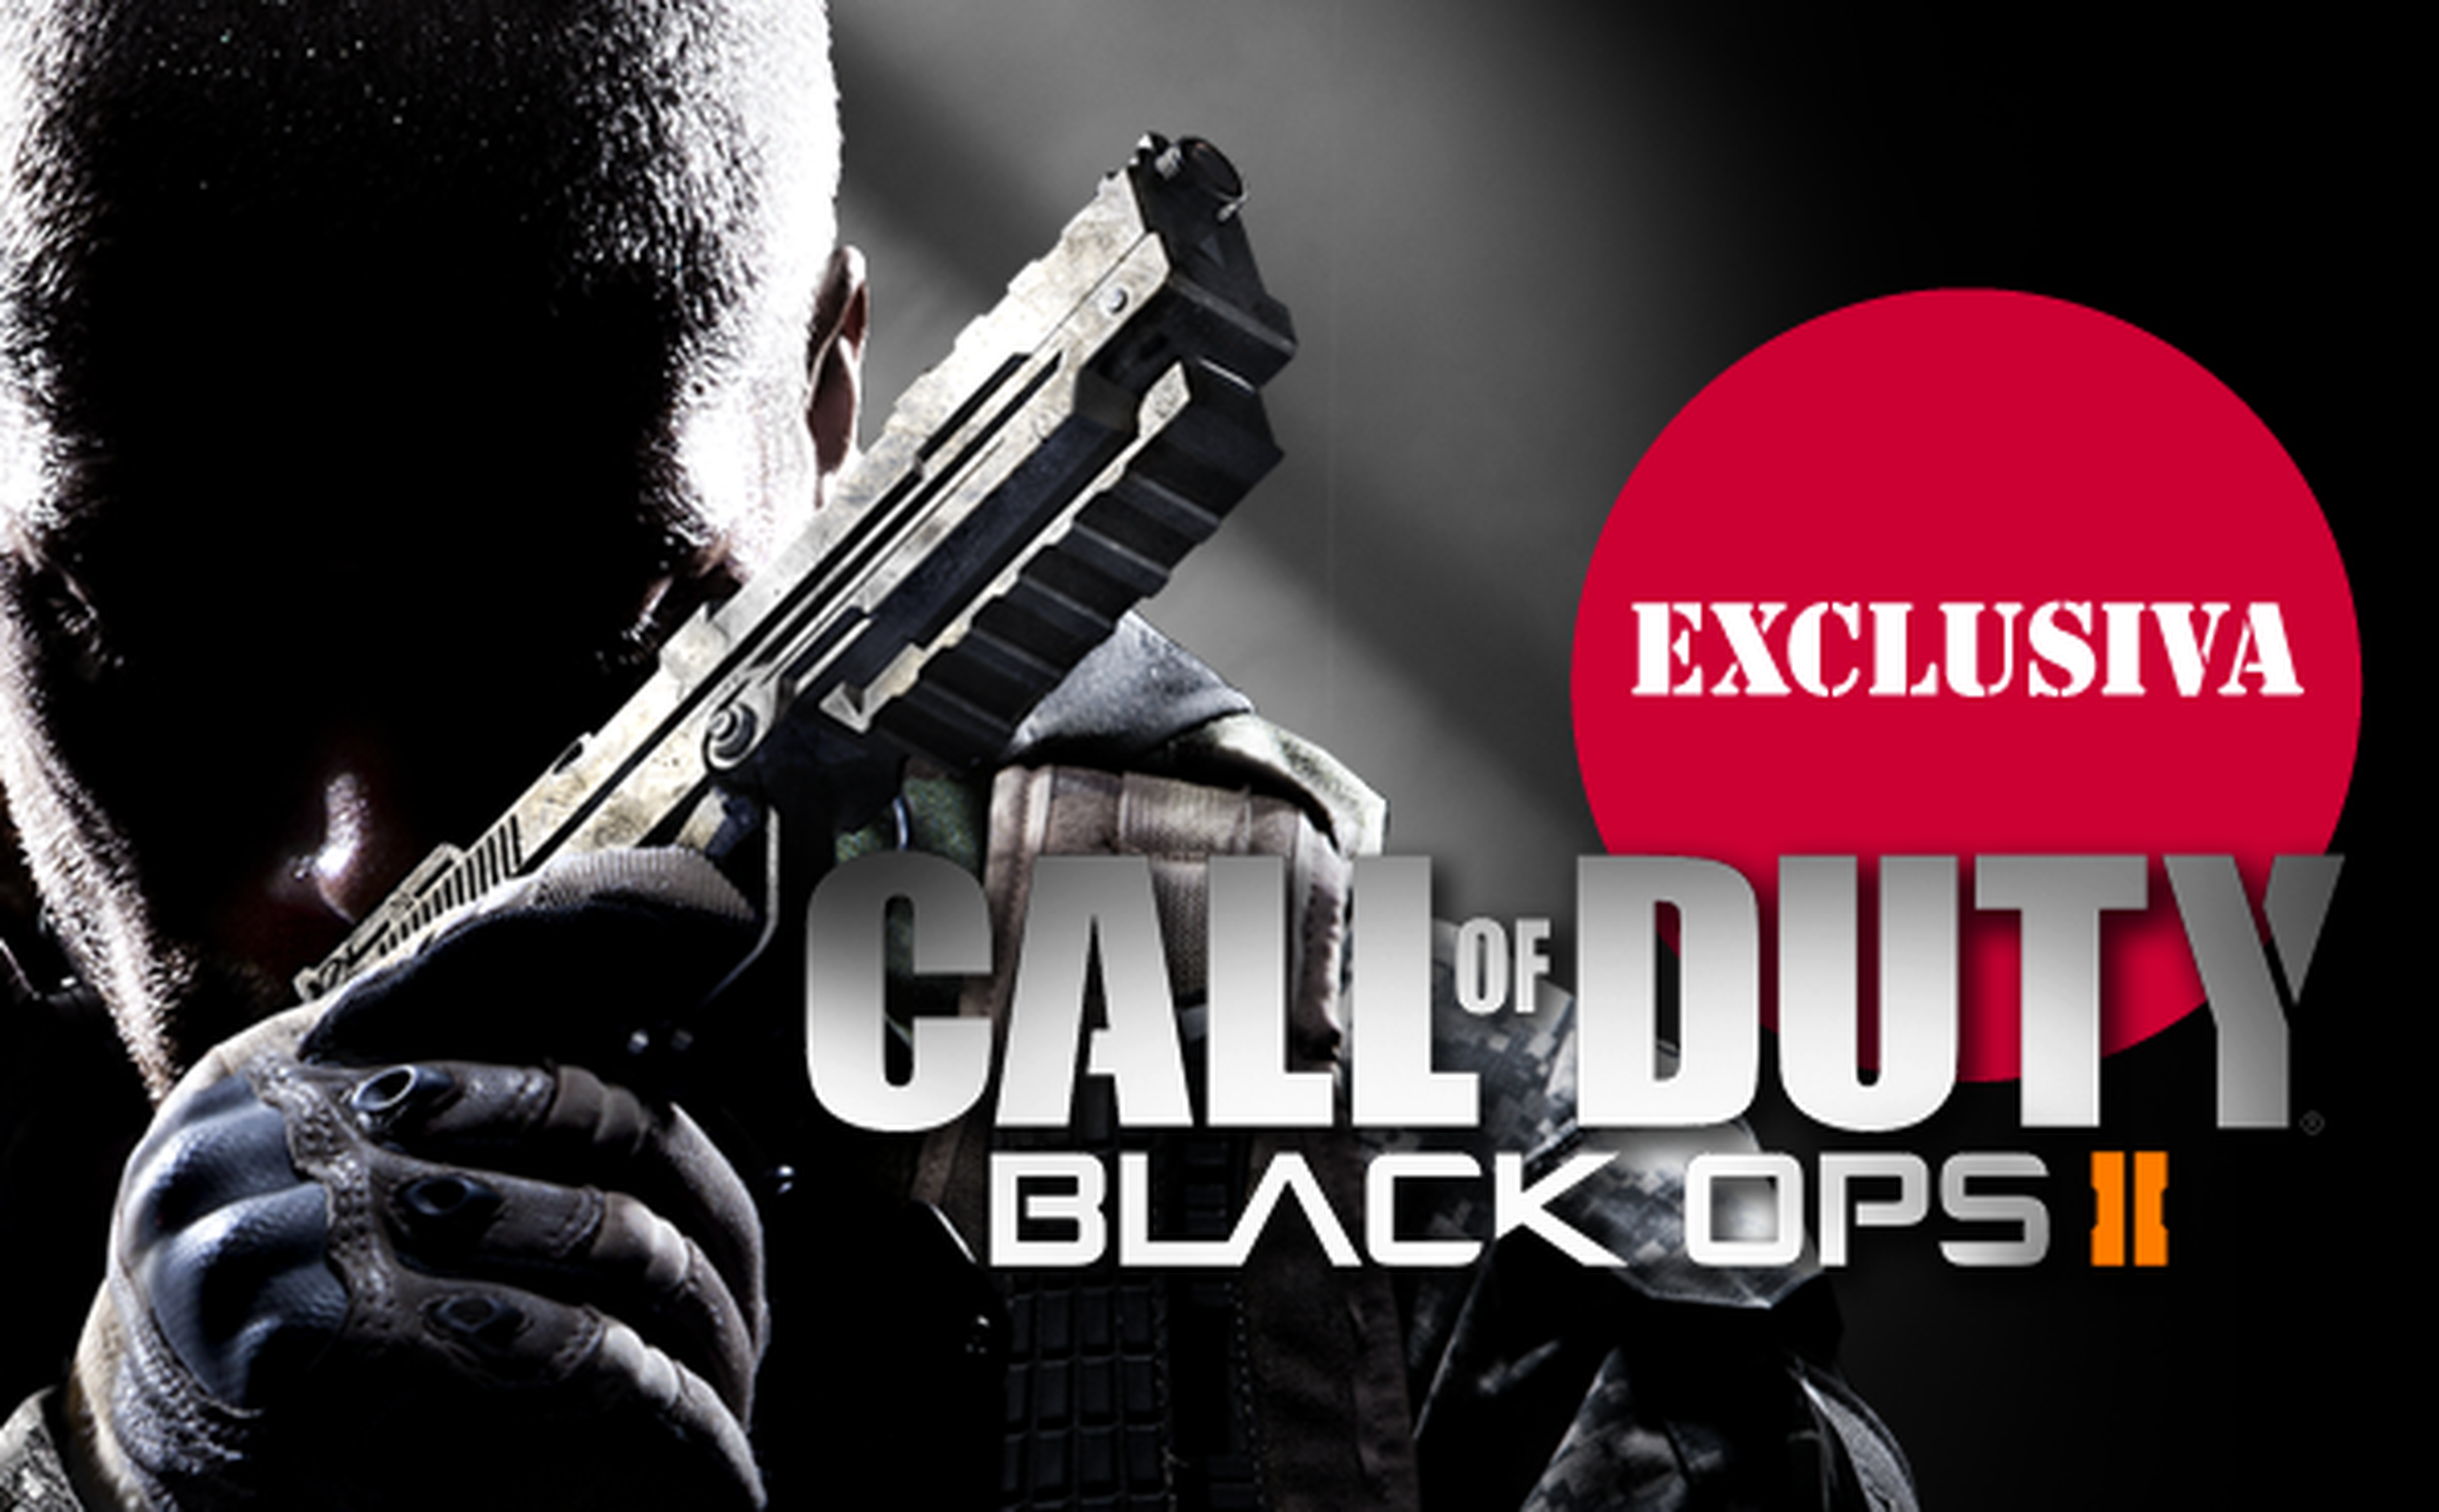 Exclusiva: Call of Duty Black Ops 2